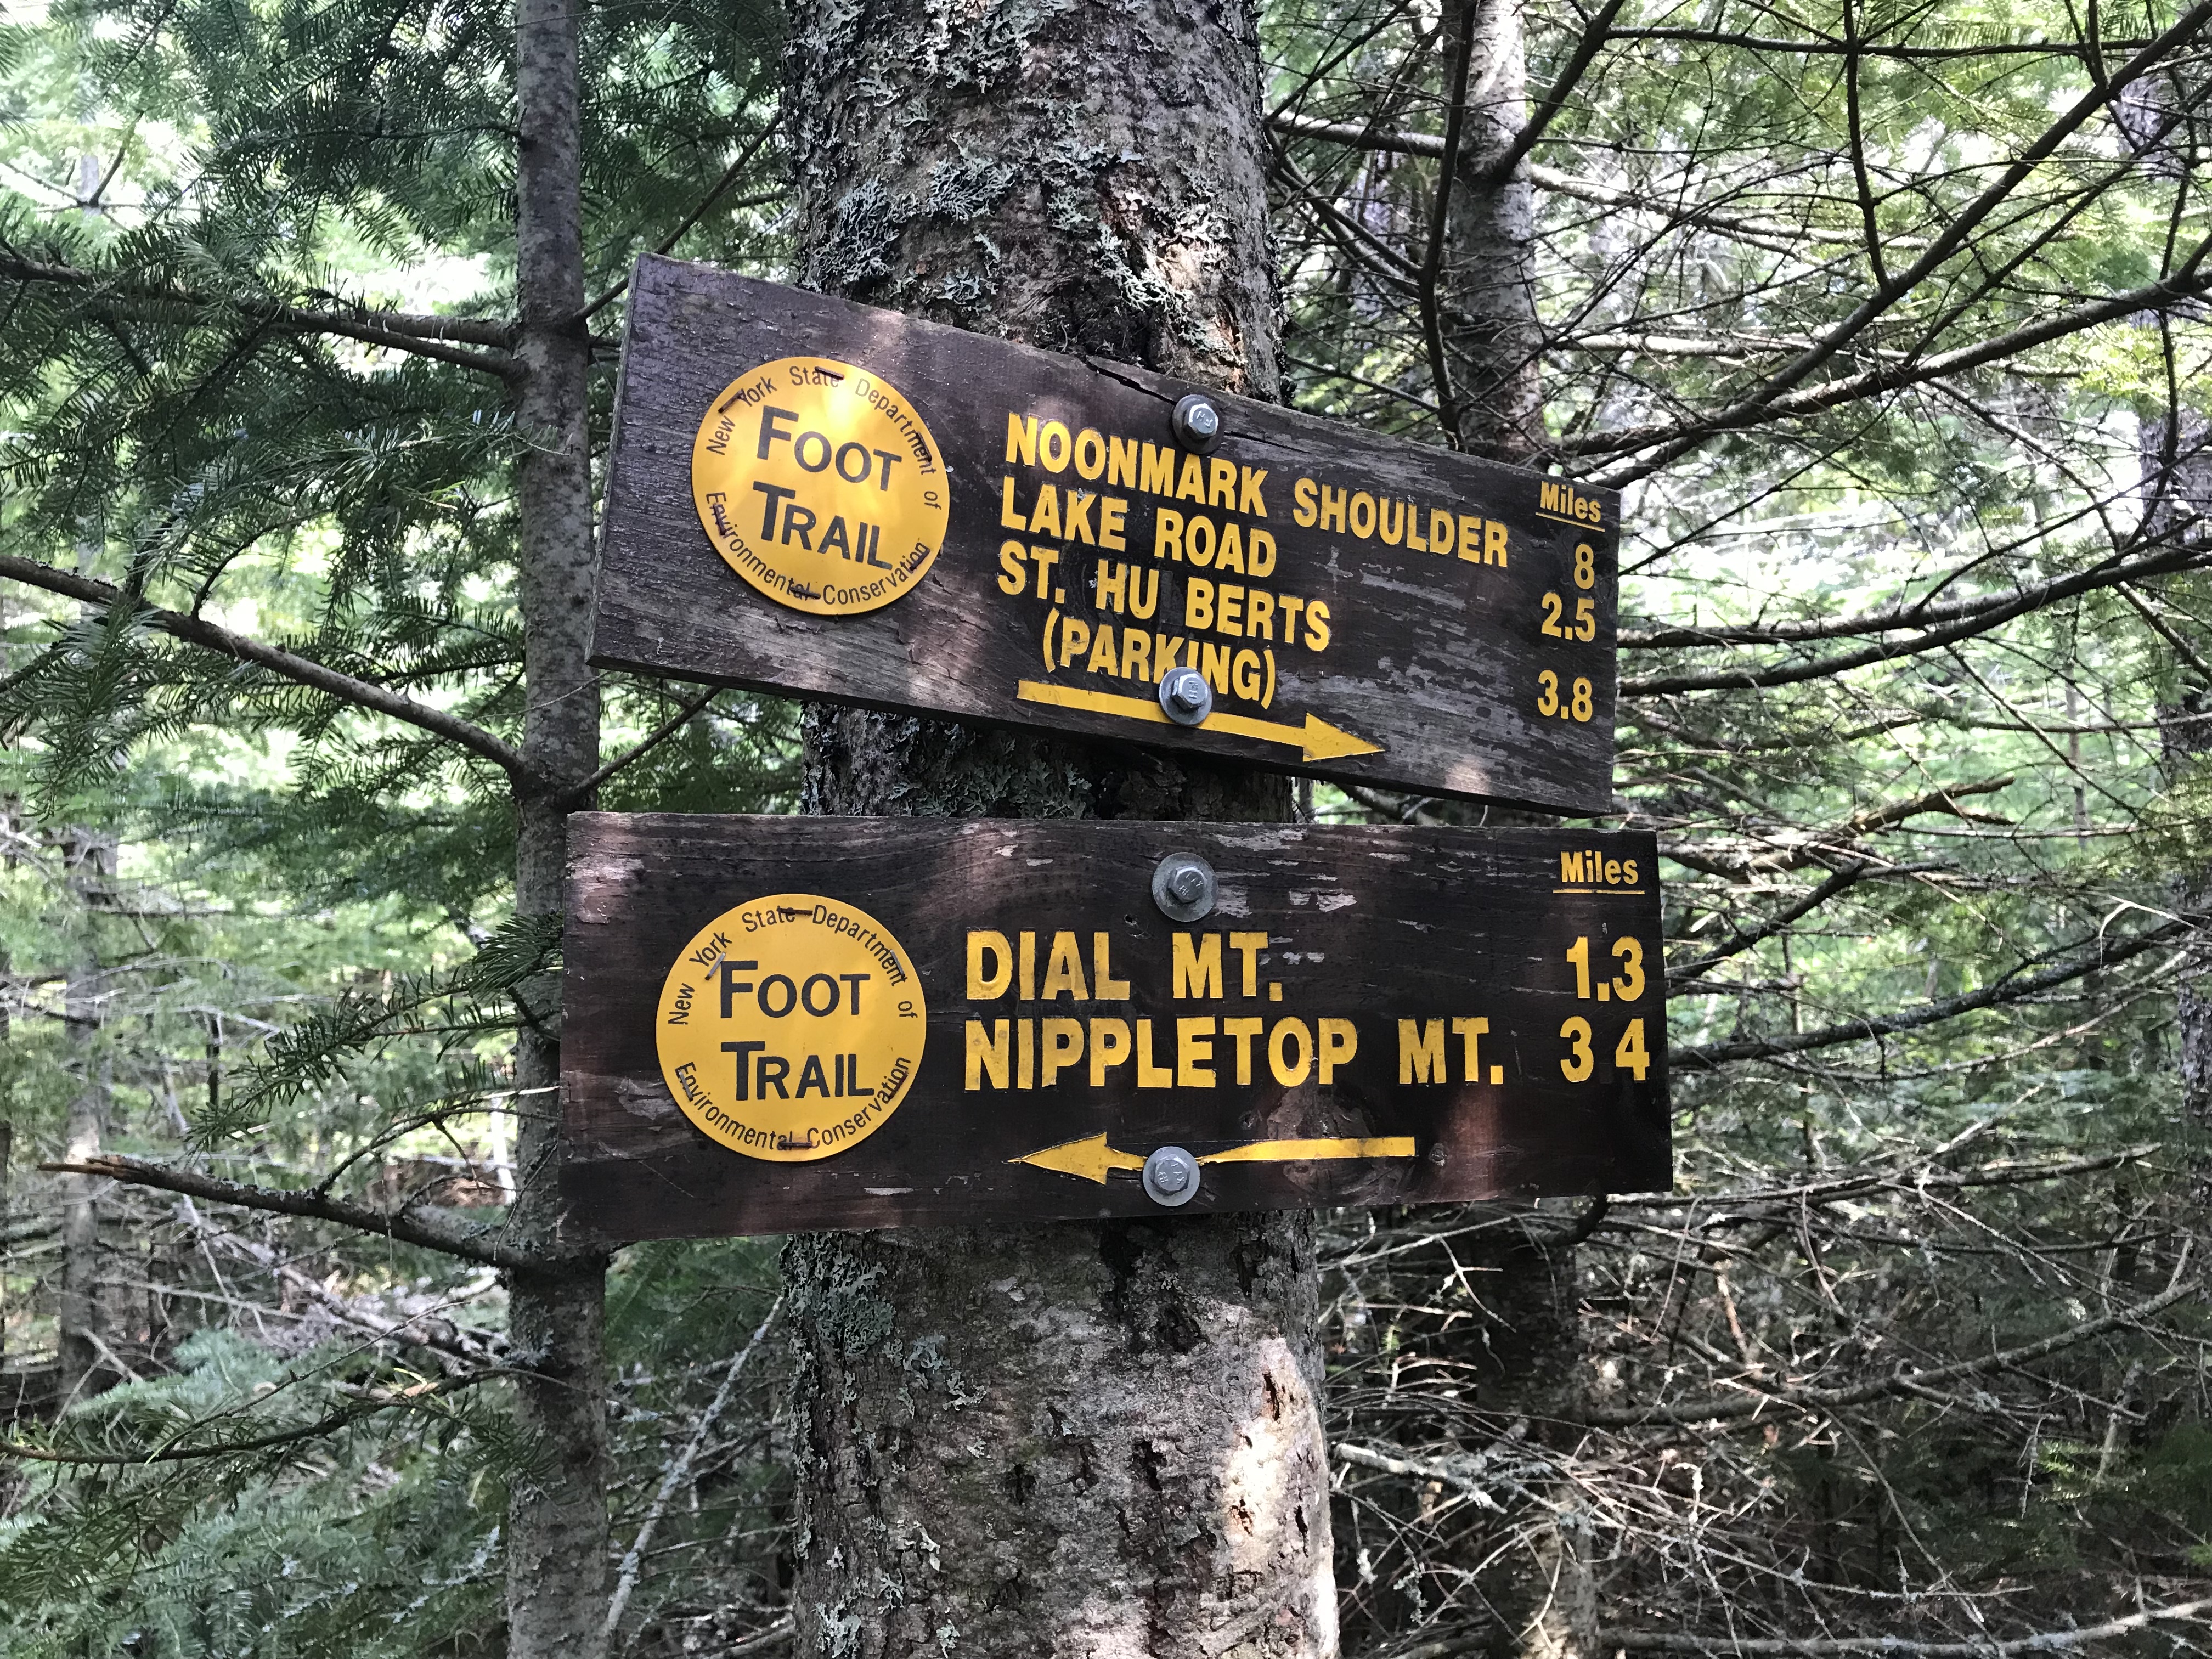 Sign at Bear Den Mountain on the way to Dial and Nippletop Mountains